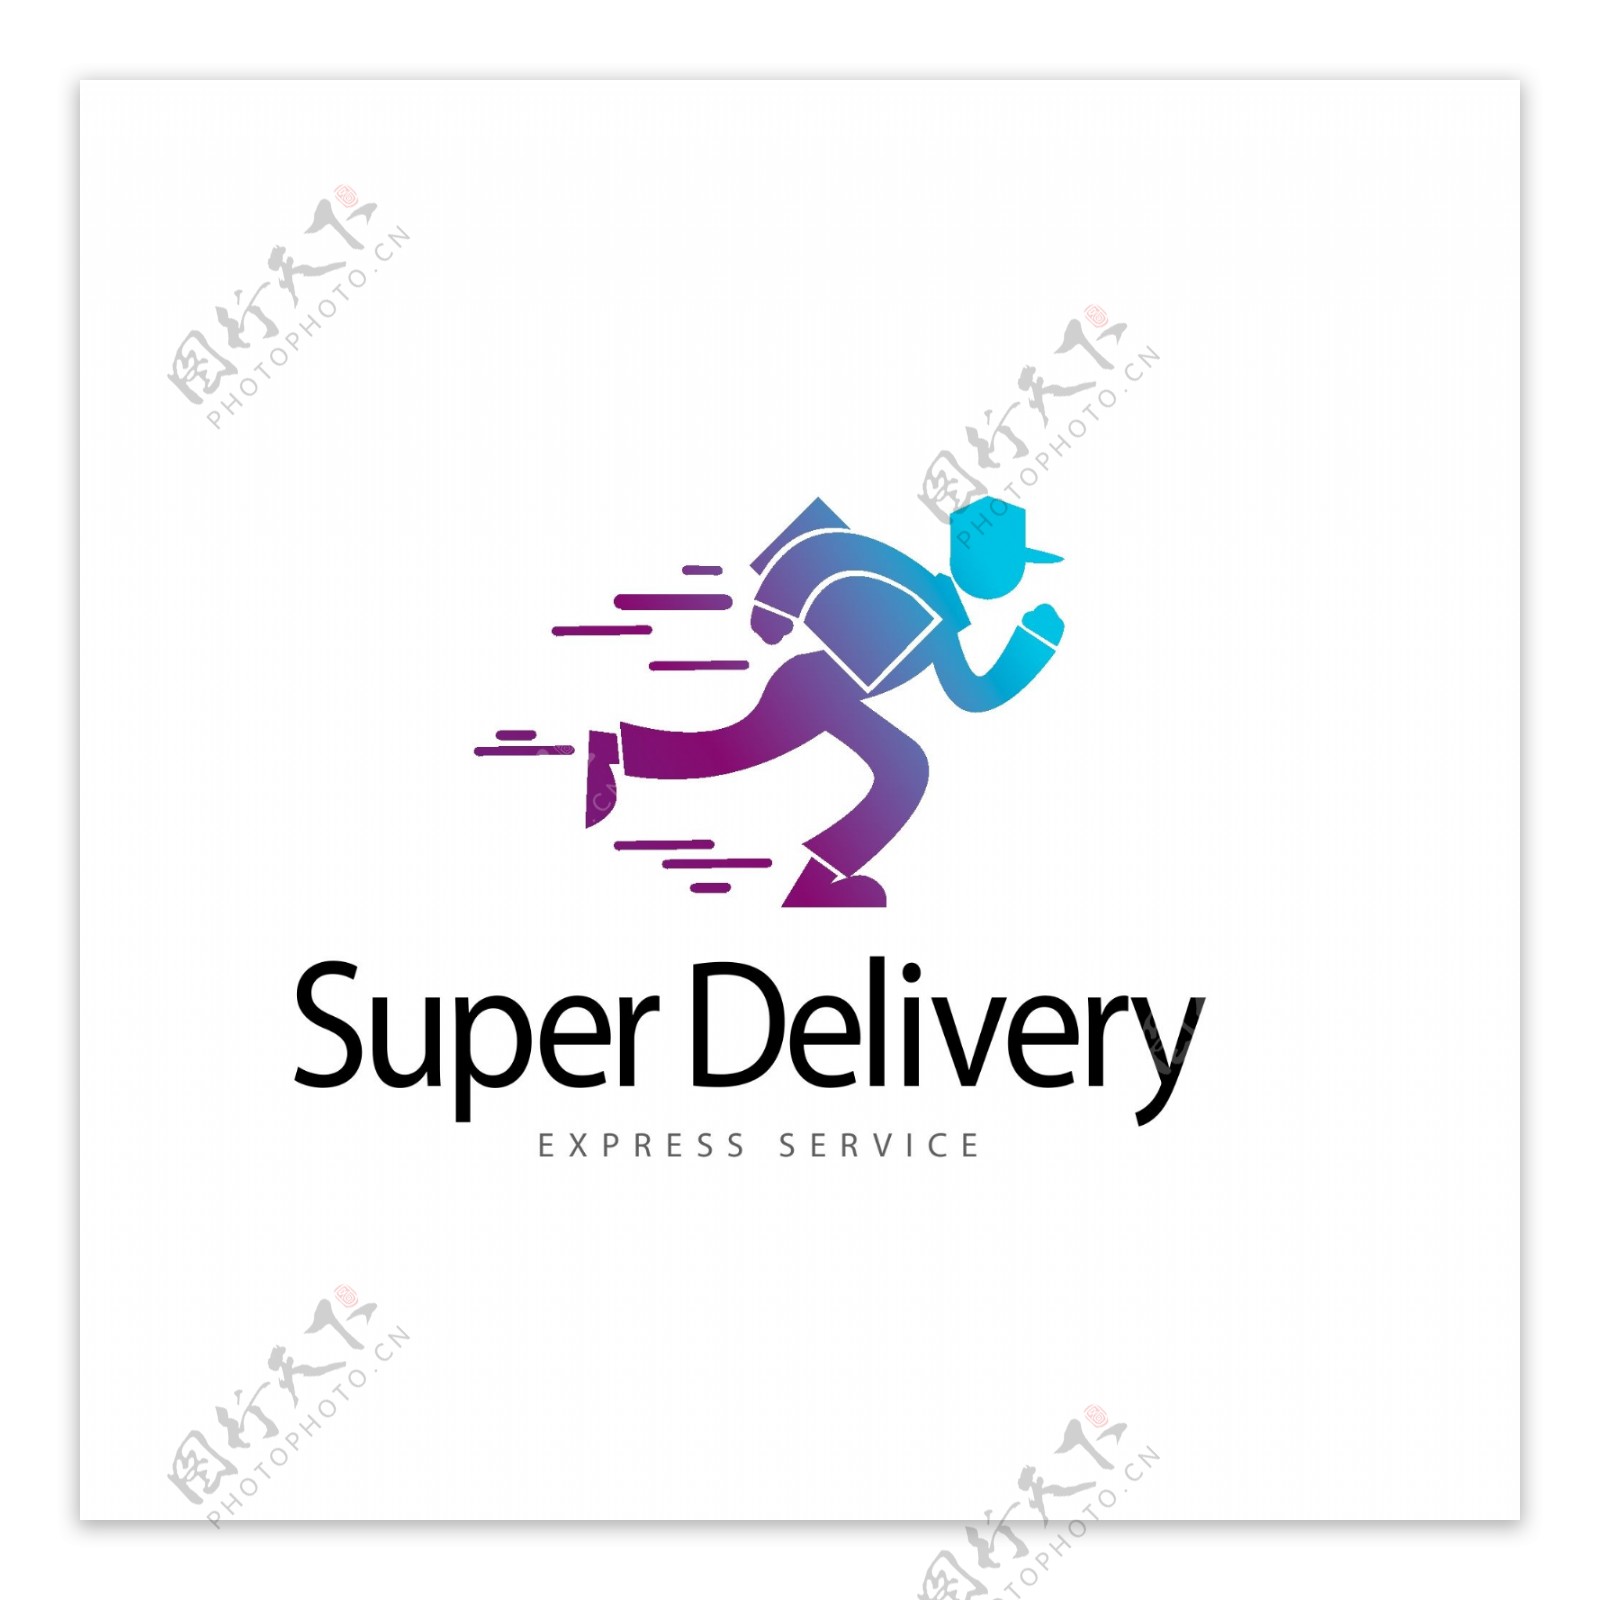 delivery渐变的人形logo模板